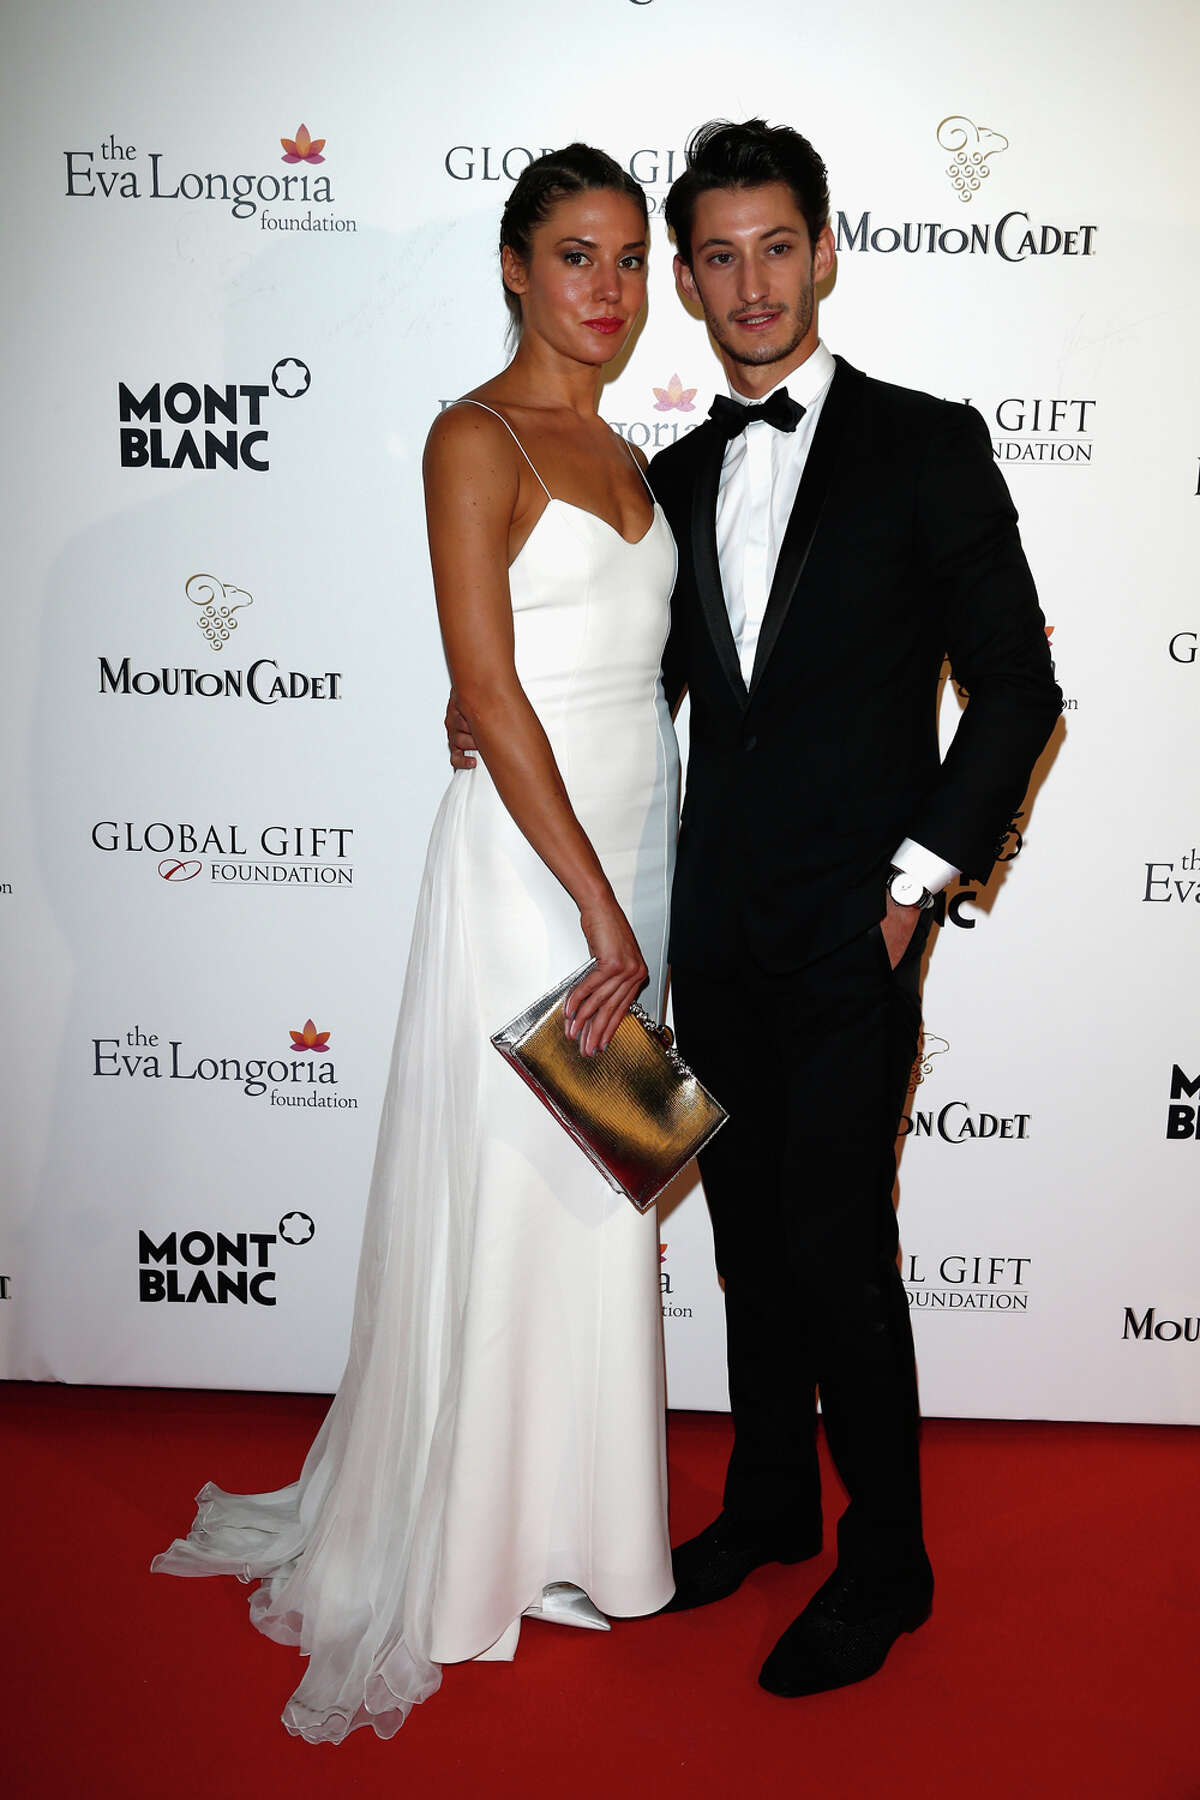 Pierre Niney (right) attends the Global Gift Gala hosted by Eva Longoria during the 67th Annual Cannes Film Festival on May 16, 2014 in Cannes, France.